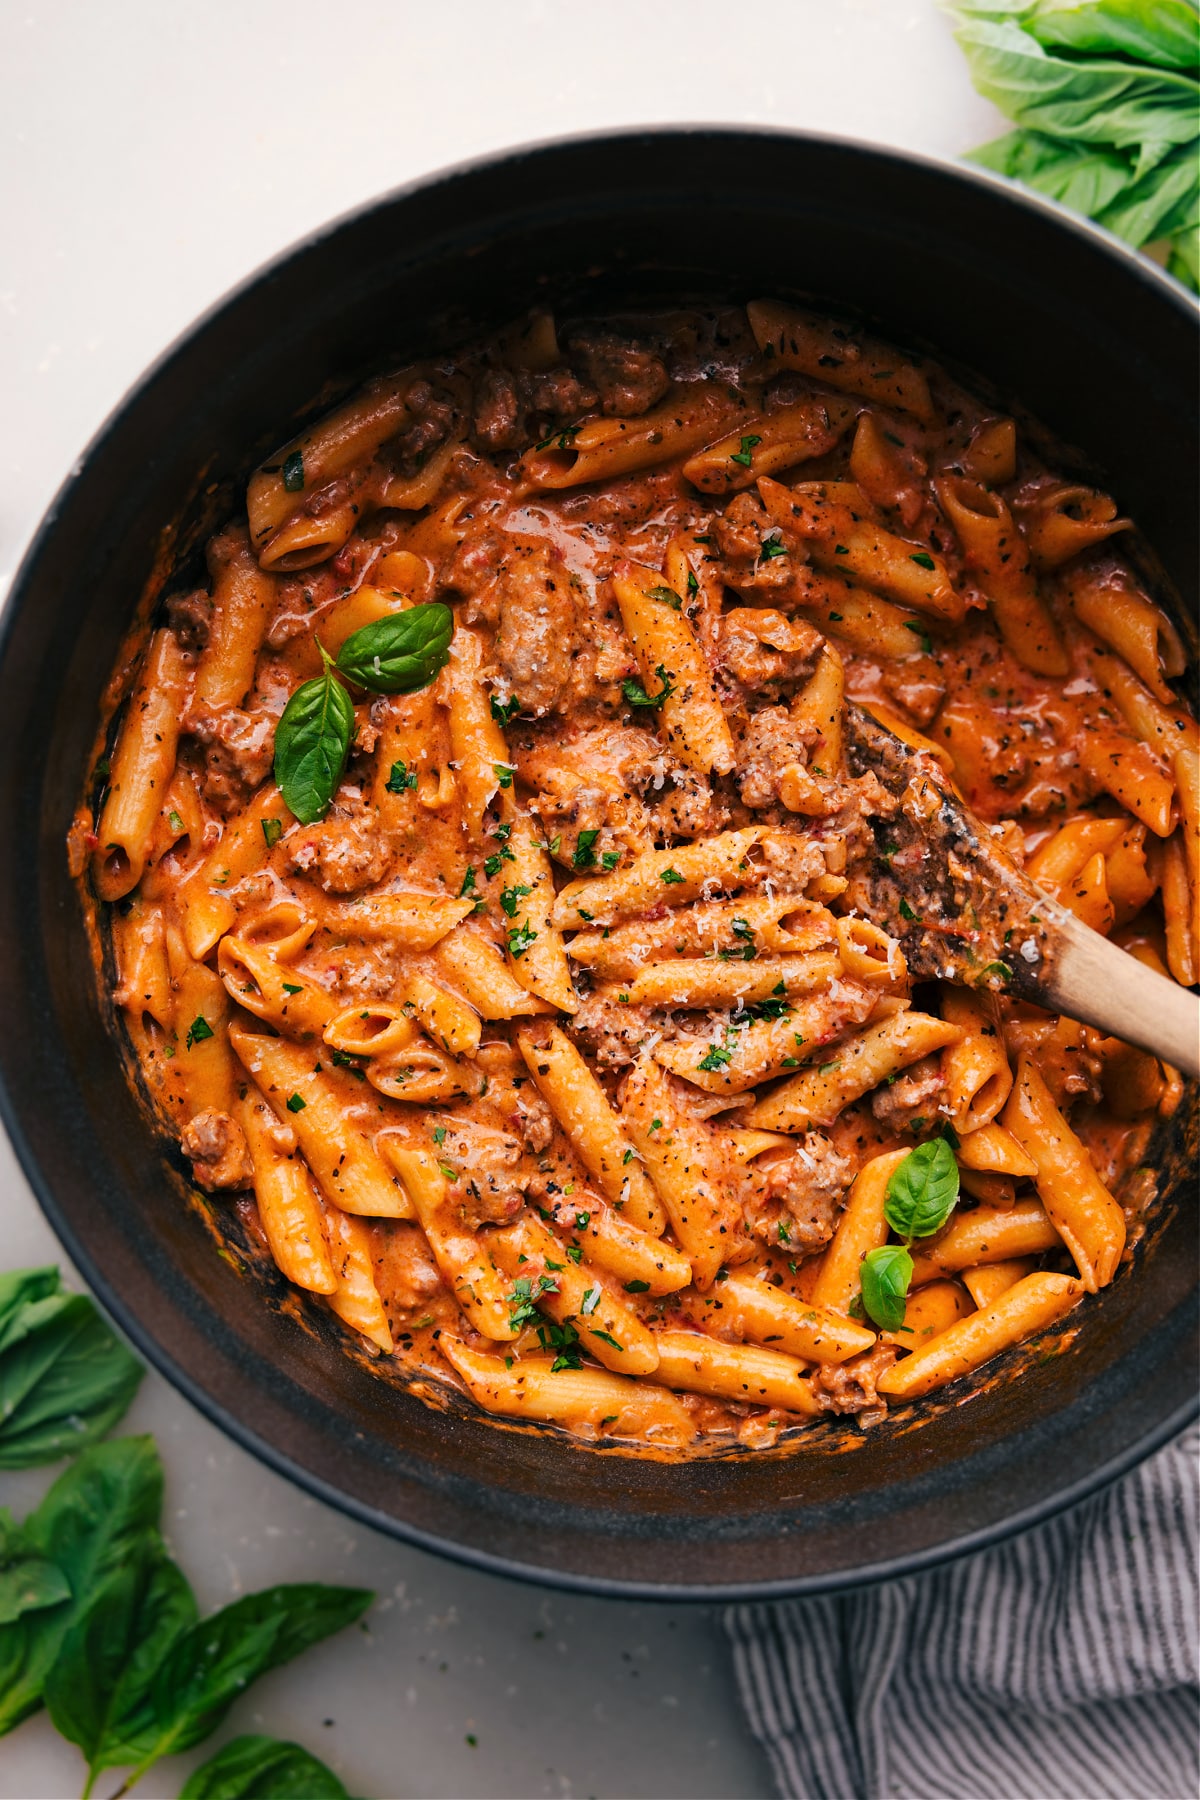 Penne Pasta with Italian Sausage in the Pot.